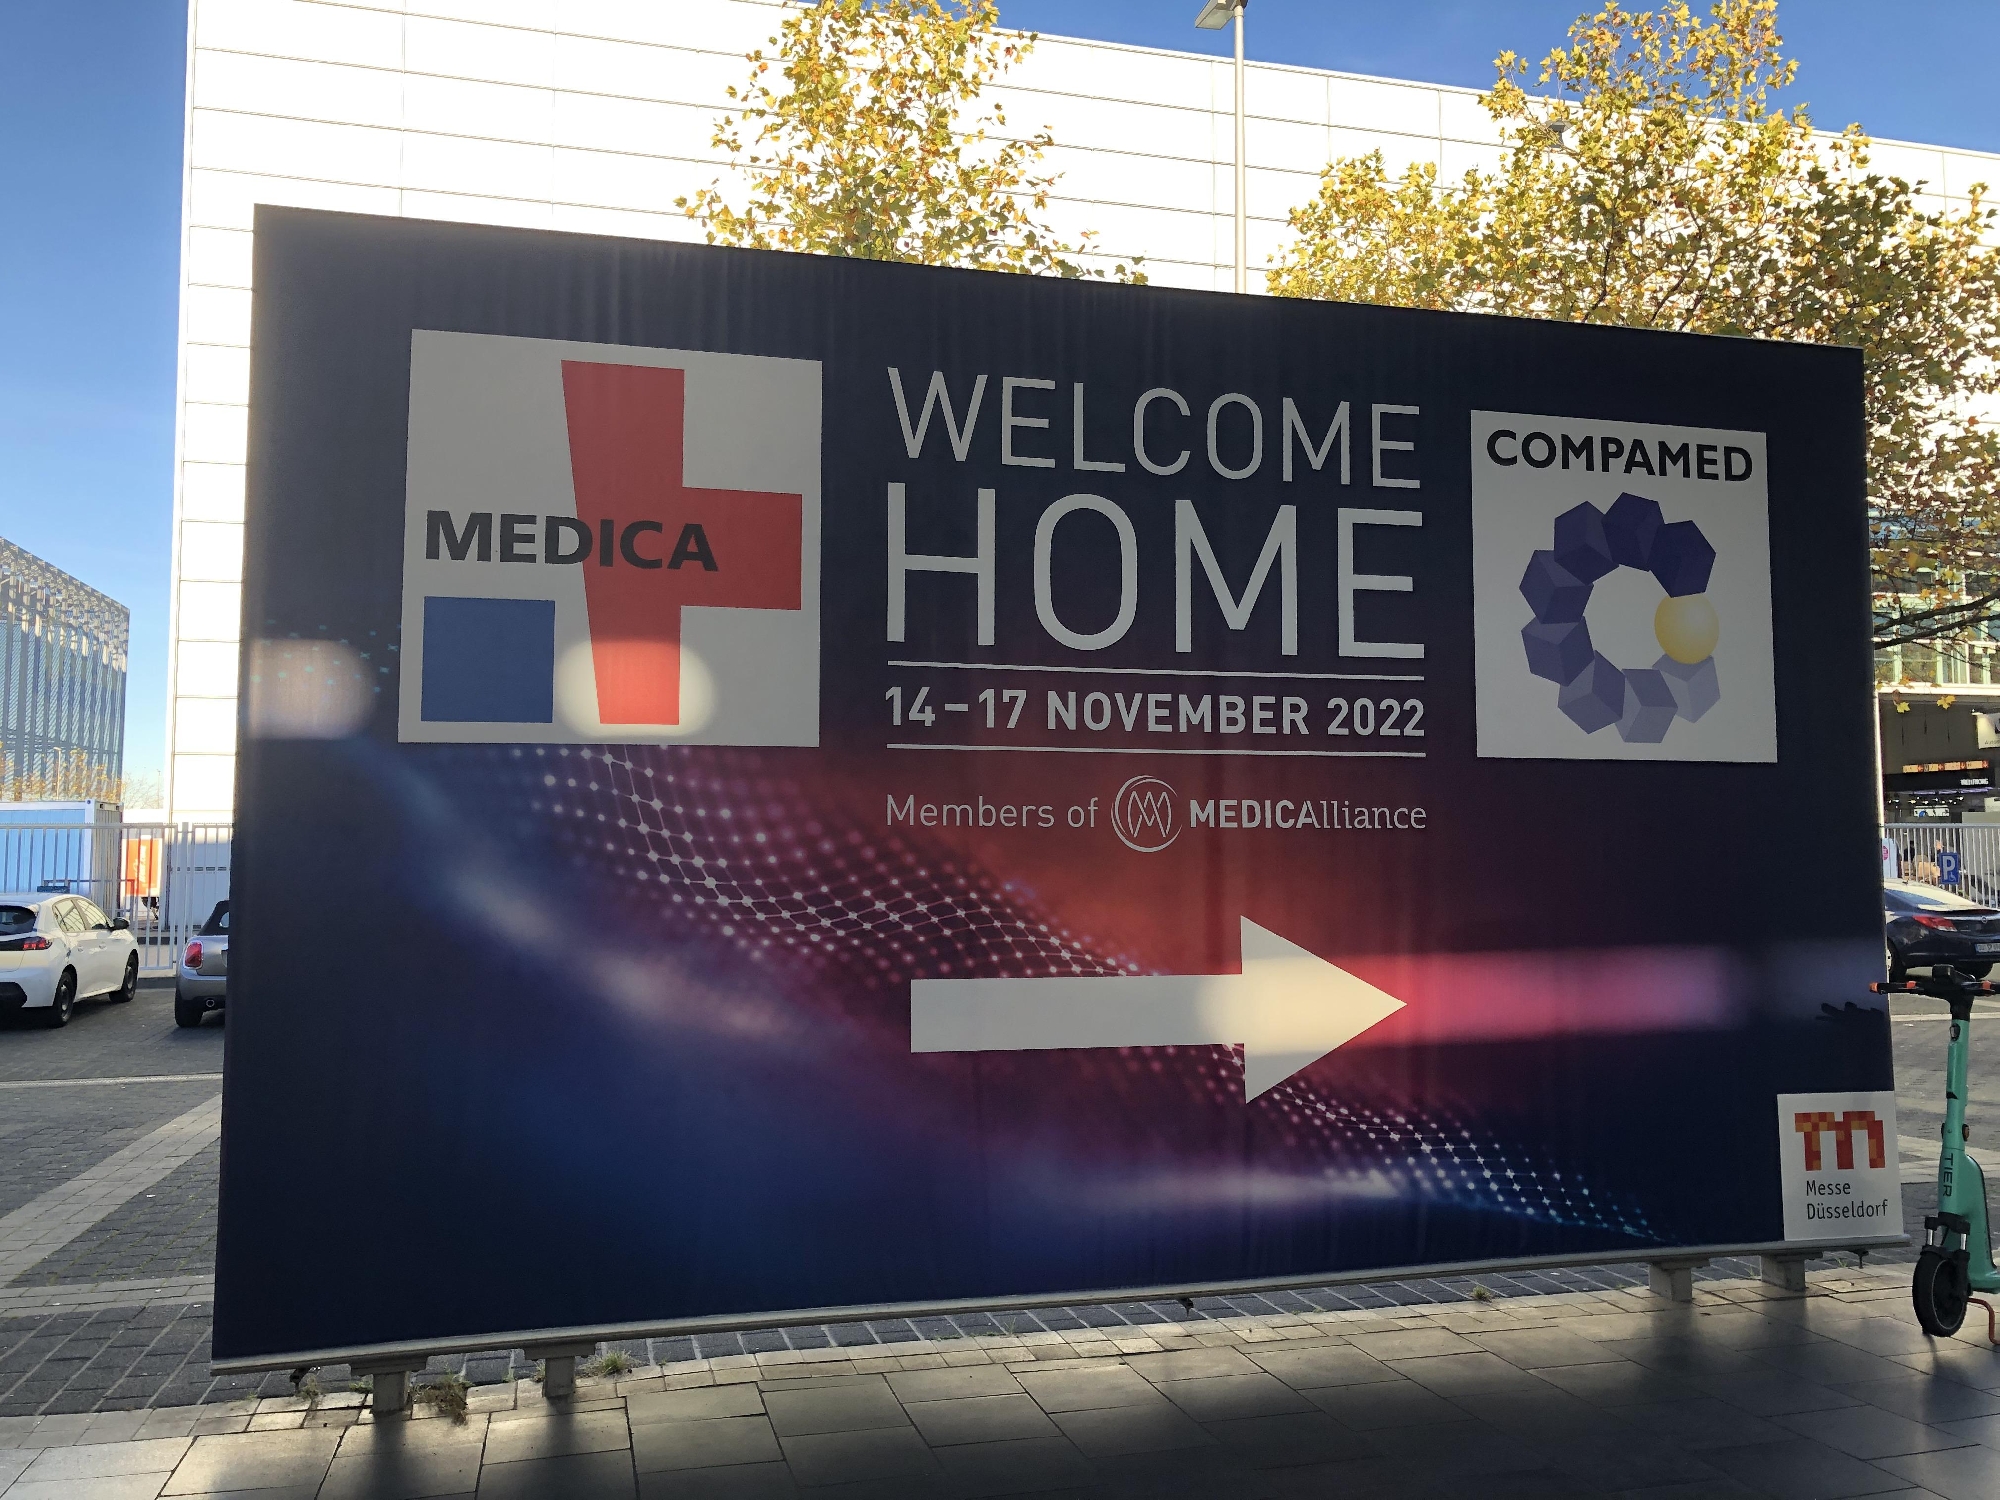 Thank you for coming to see our exhibition at COMPAMED2022 Dusseldorf Germany!